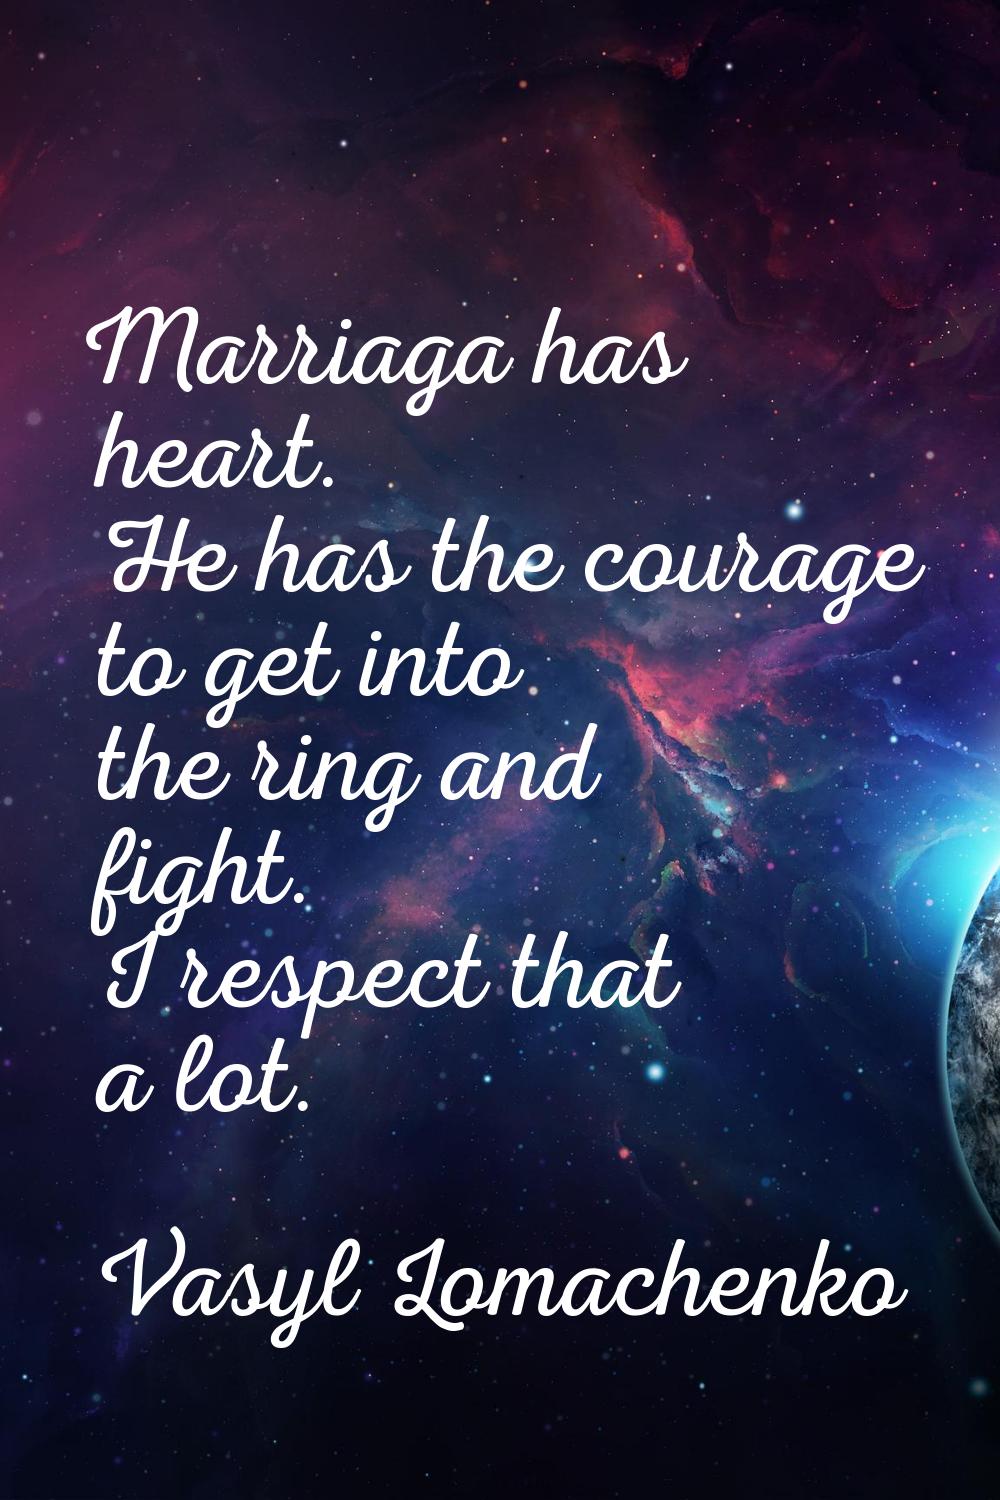 Marriaga has heart. He has the courage to get into the ring and fight. I respect that a lot.